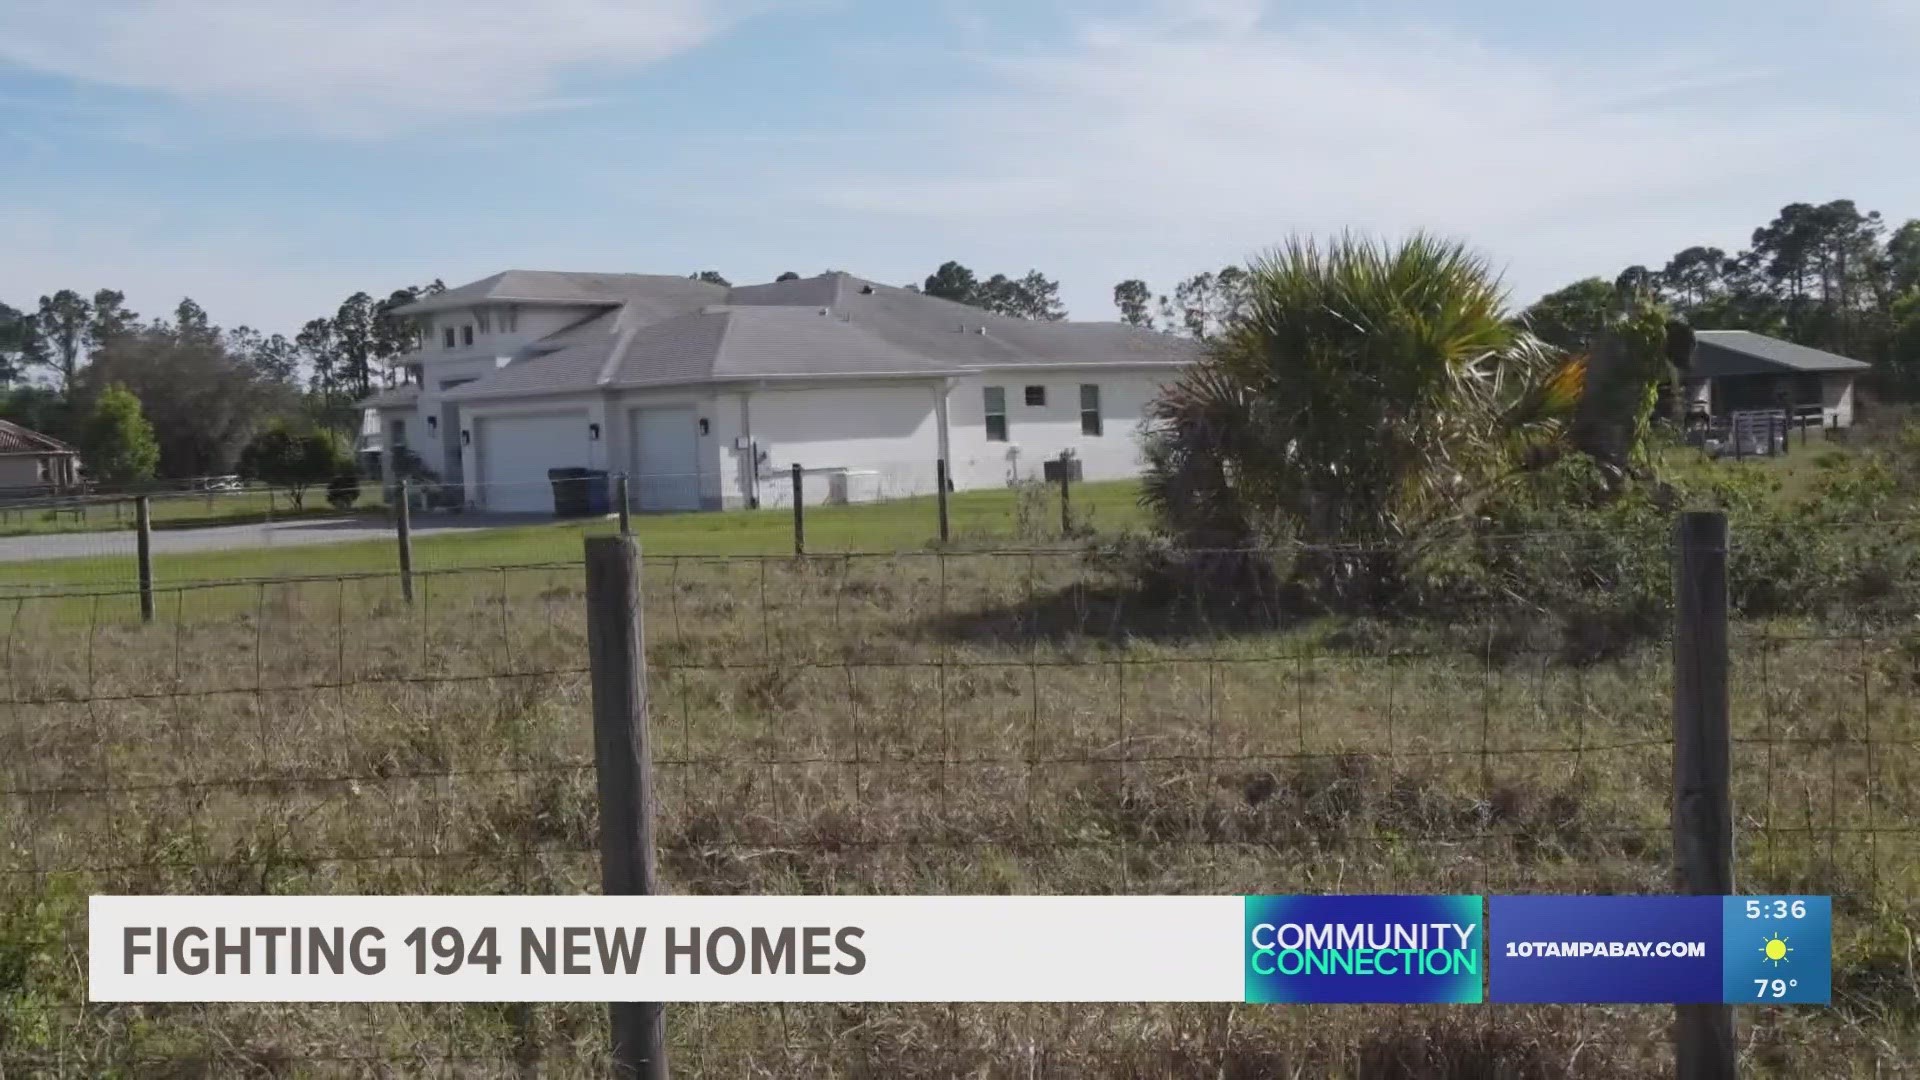 Over a dozen people are suing Hillsborough County after a development for 194 homes is under construction along Patterson Road in Keystone. The county won't comment.